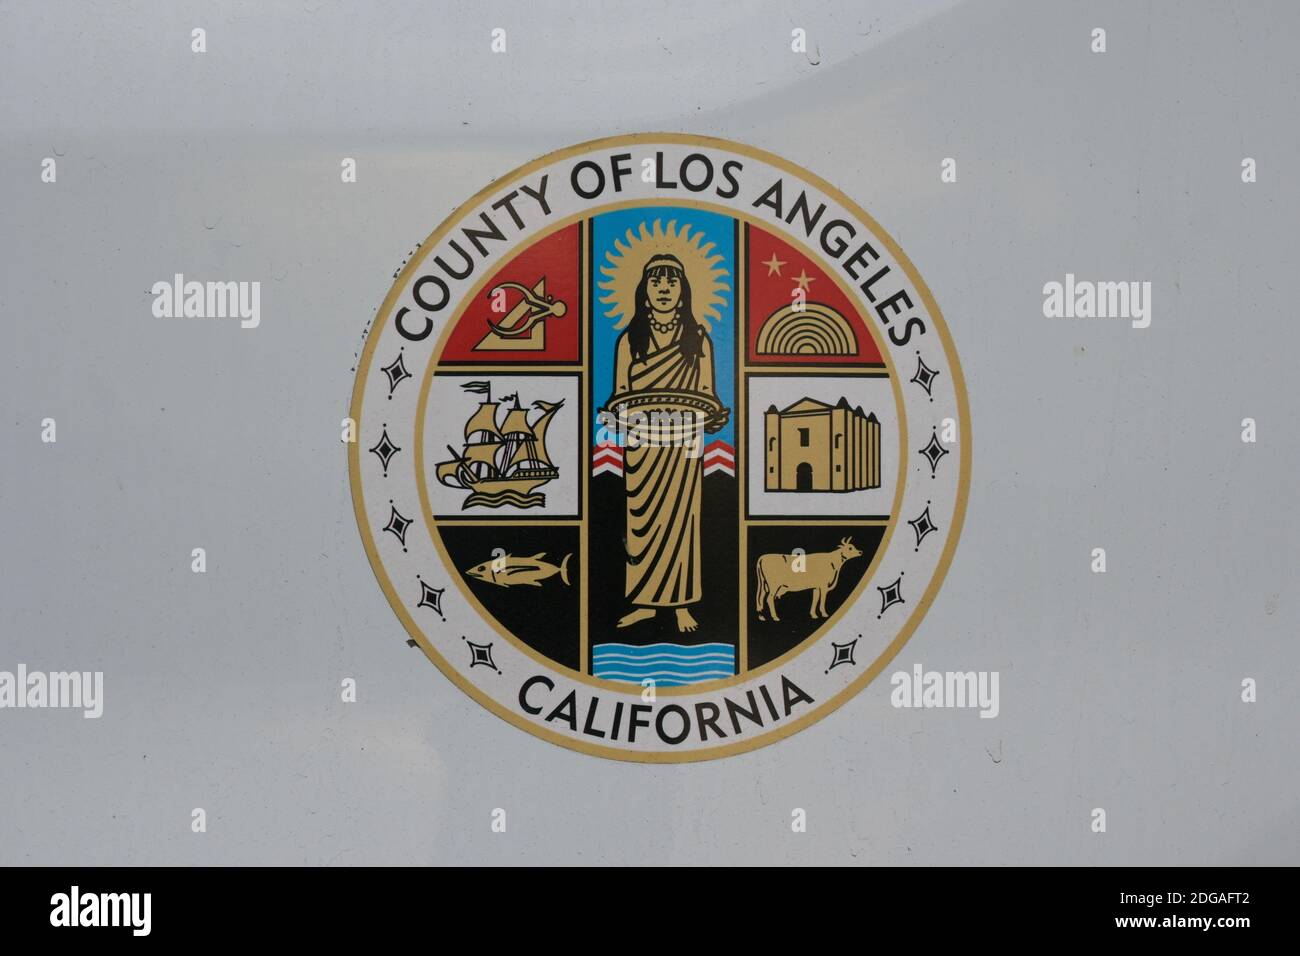 Detailed view of County of Los Angeles California logo on a van outside of Los Angeles County Regional Offices, Thursday, Nov. 5, 2020, in Downey, Cal Stock Photo